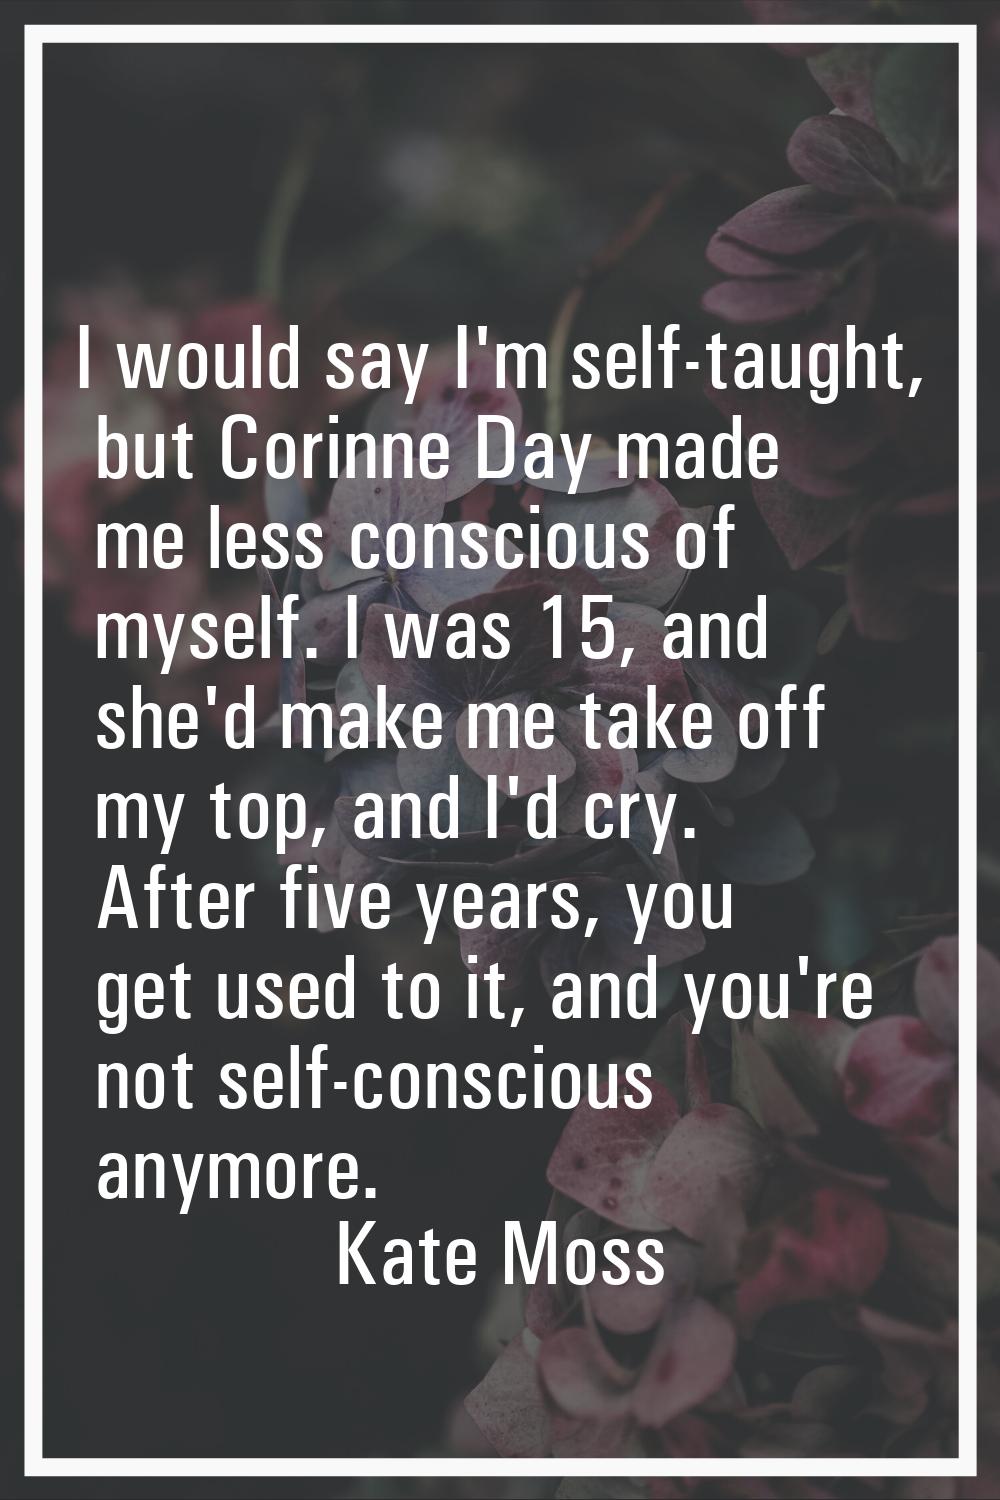 I would say I'm self-taught, but Corinne Day made me less conscious of myself. I was 15, and she'd 